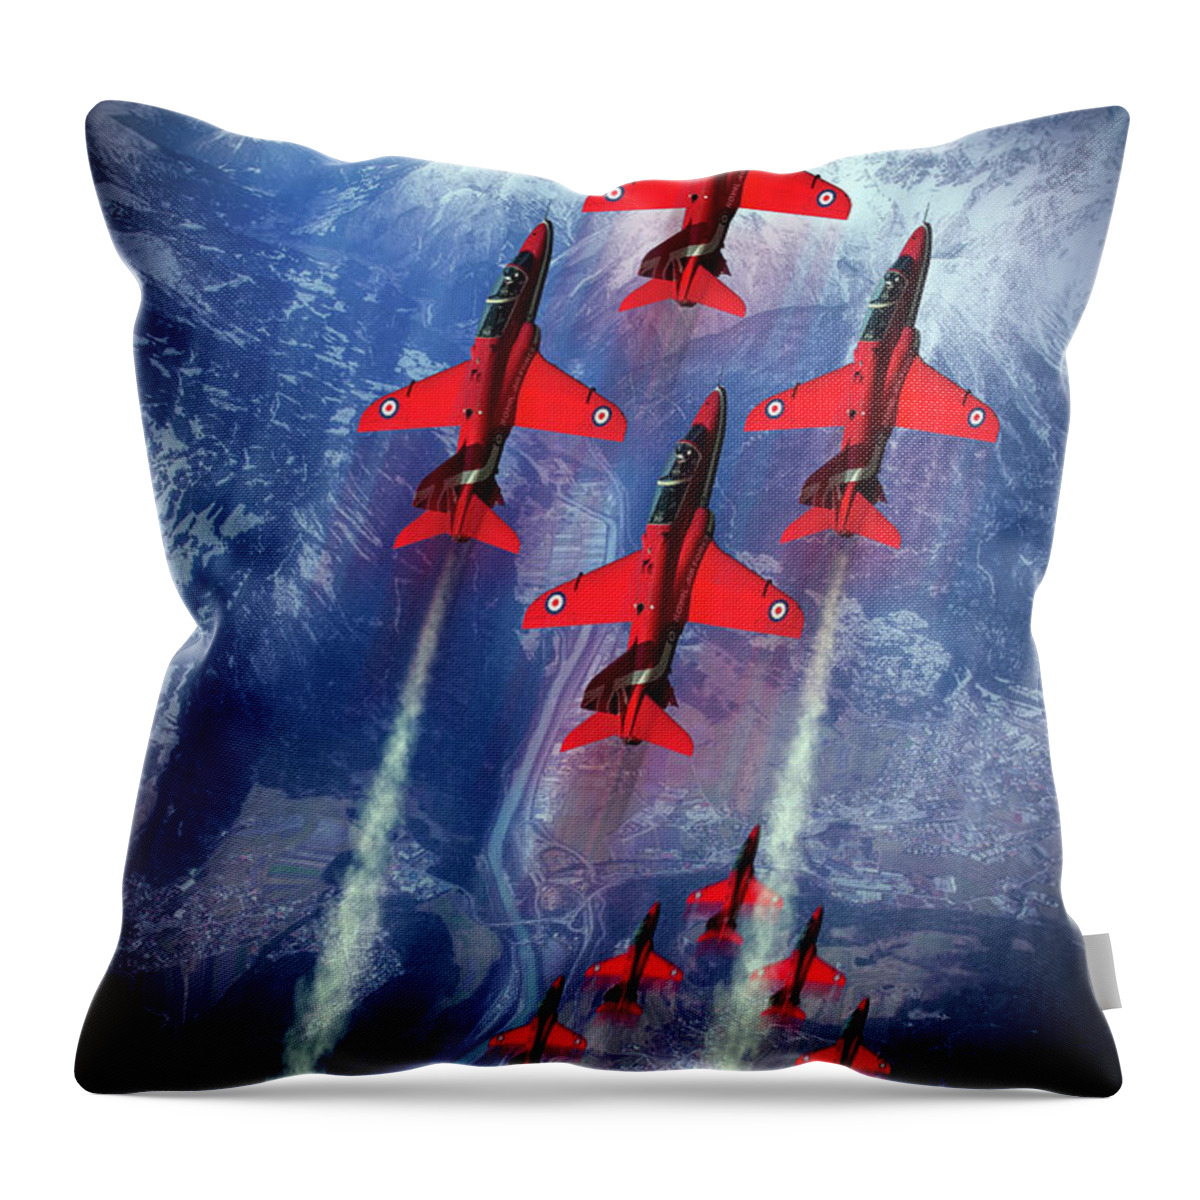 Red Arrows Throw Pillow featuring the digital art The Great Red Arrows by Airpower Art